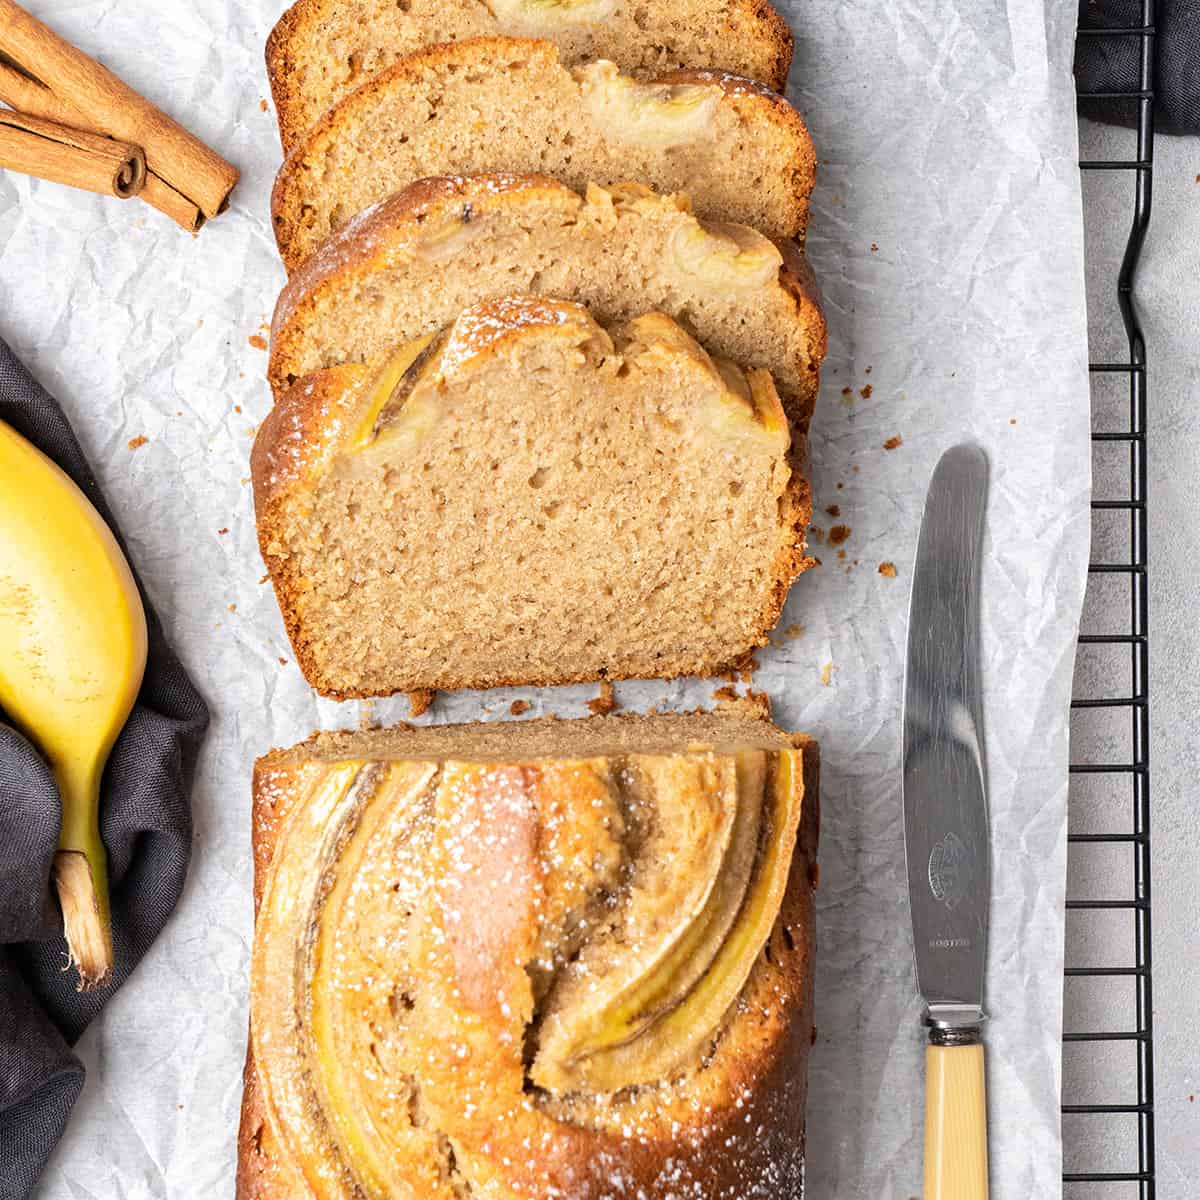 slices of Banana bread on a cooling rack.